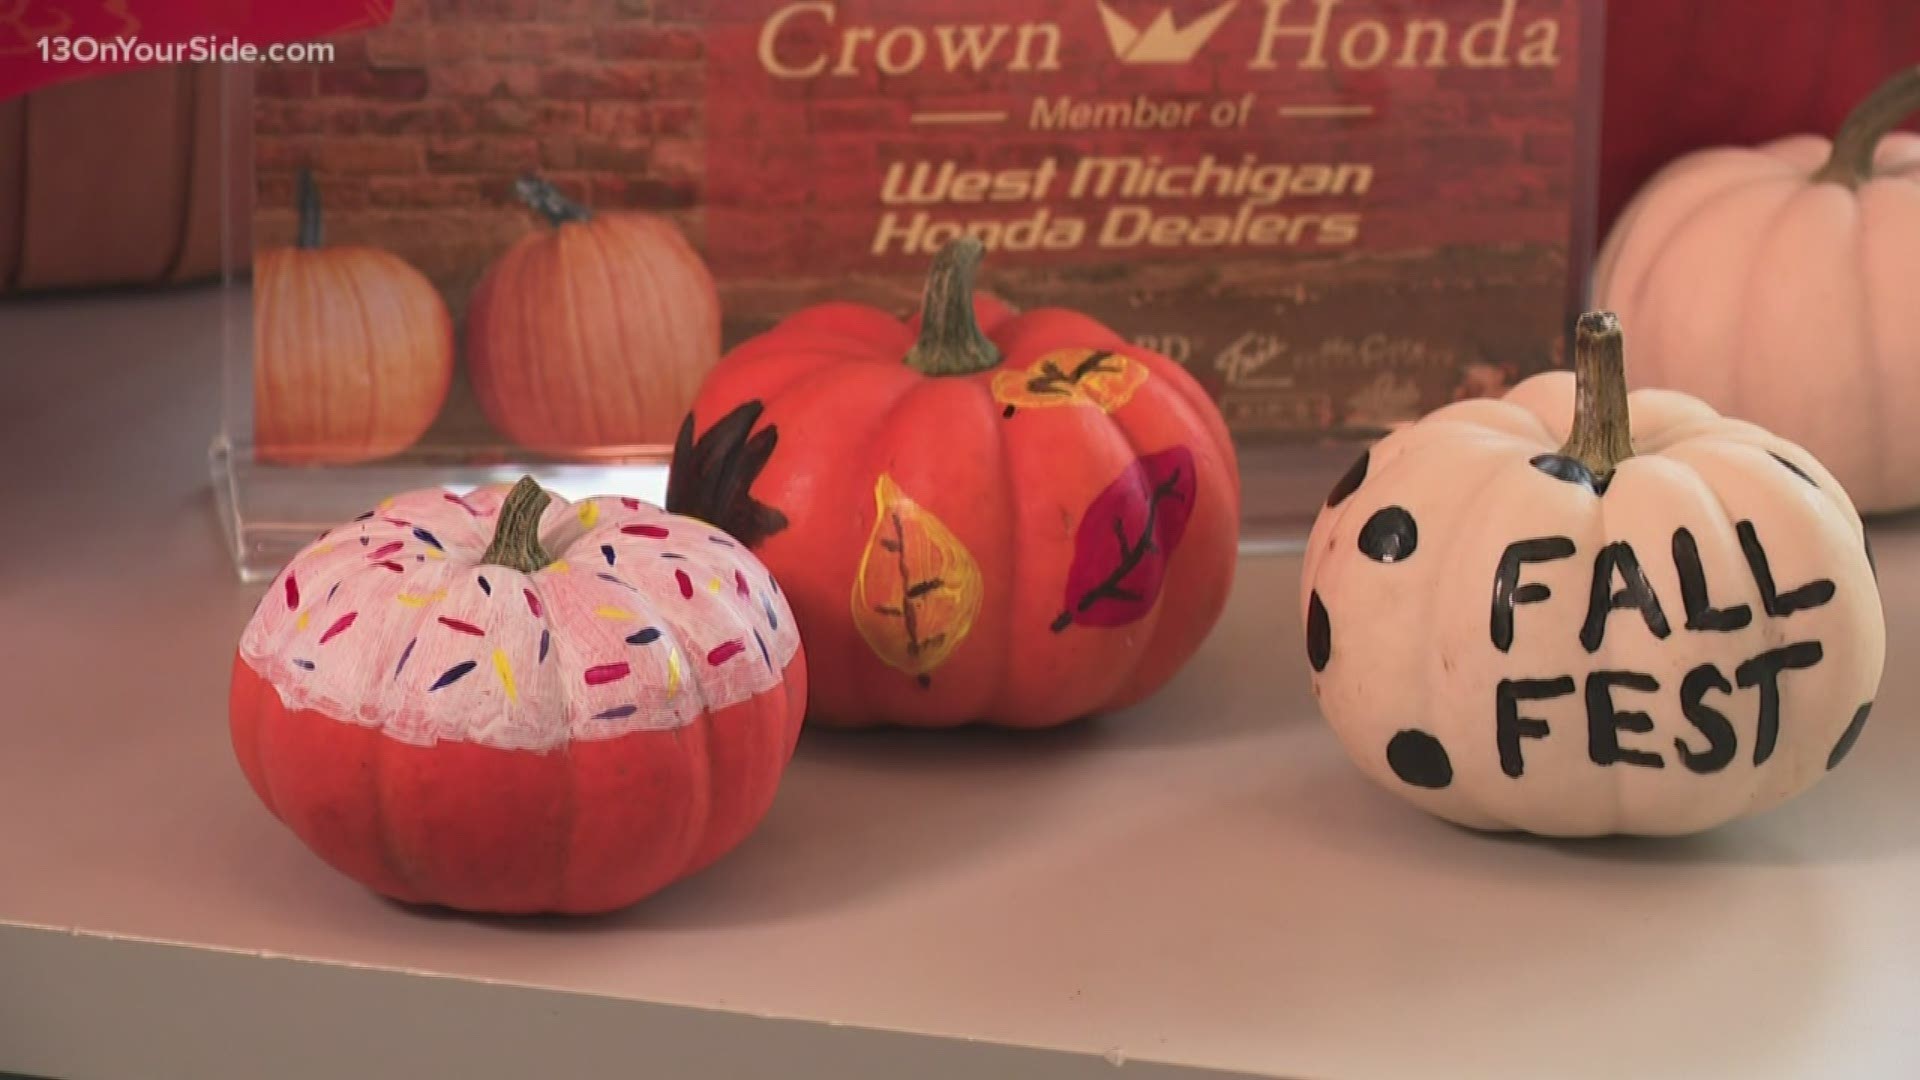 This weekend in West Michigan, enjoy professional pumpkin carvings, trick or treating, a pumpkin themed run and more fall fun.